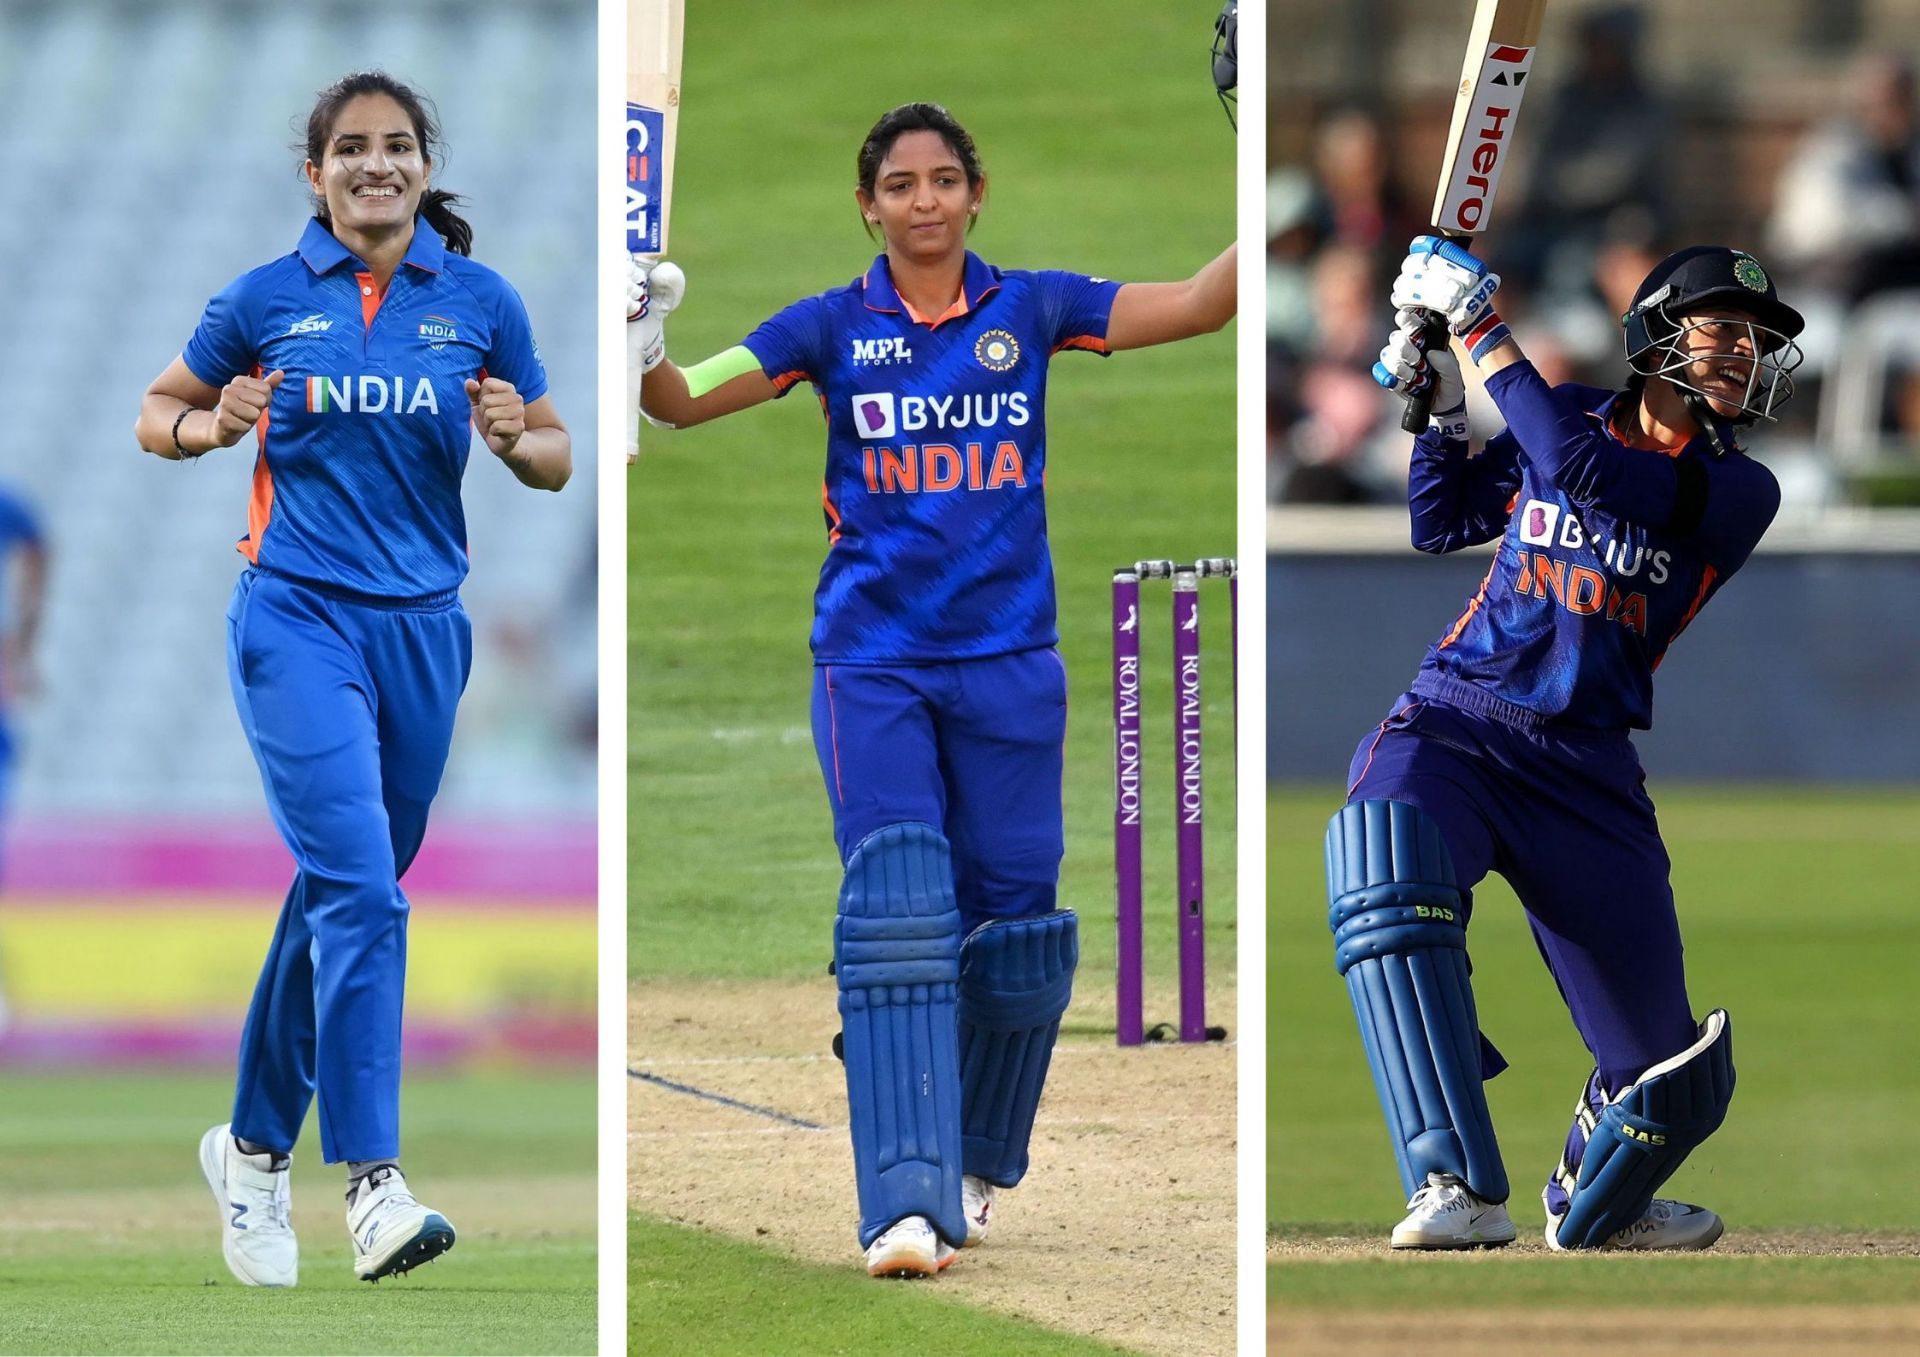 The Women in Blue are eyeing a record seventh Asia Cup title!